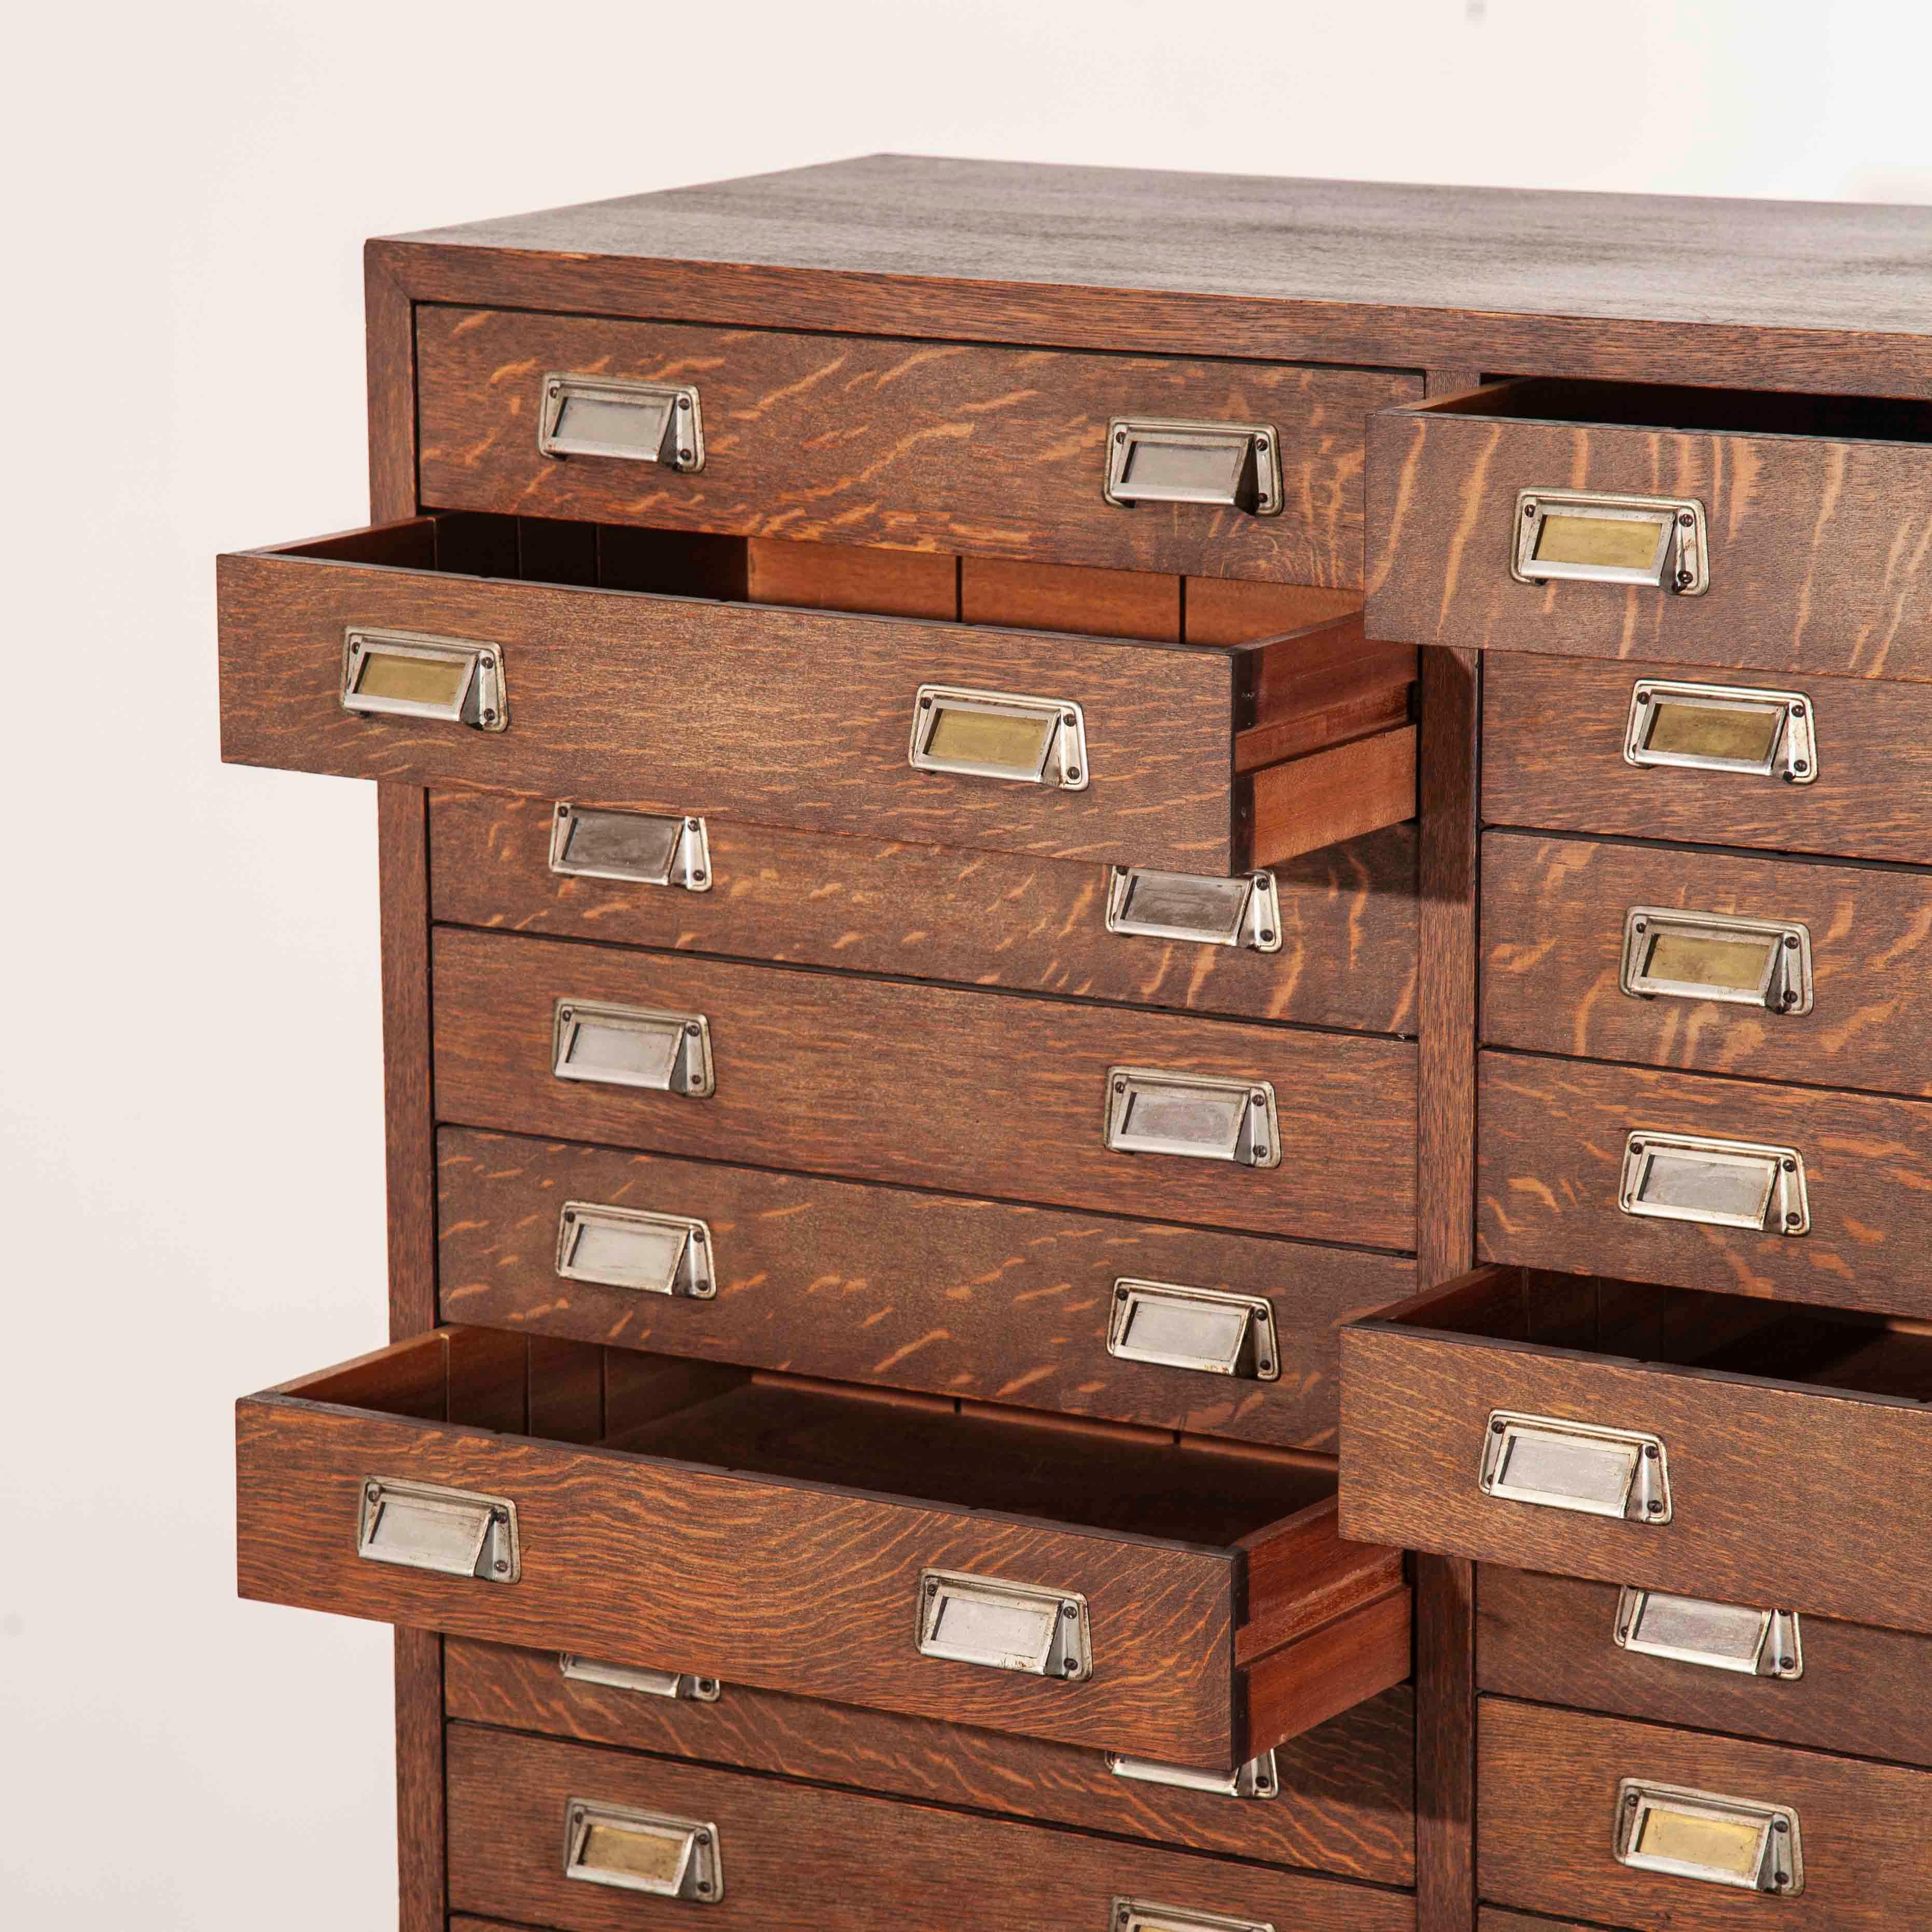 1950s oak apothecary multi drawer chest of drawers – Twenty eight drawers
1950s oak apothecary multi drawer chest of drawers – twenty eight drawers. The chest of drawers is in incredible condition with a complete set of original handles and a rich